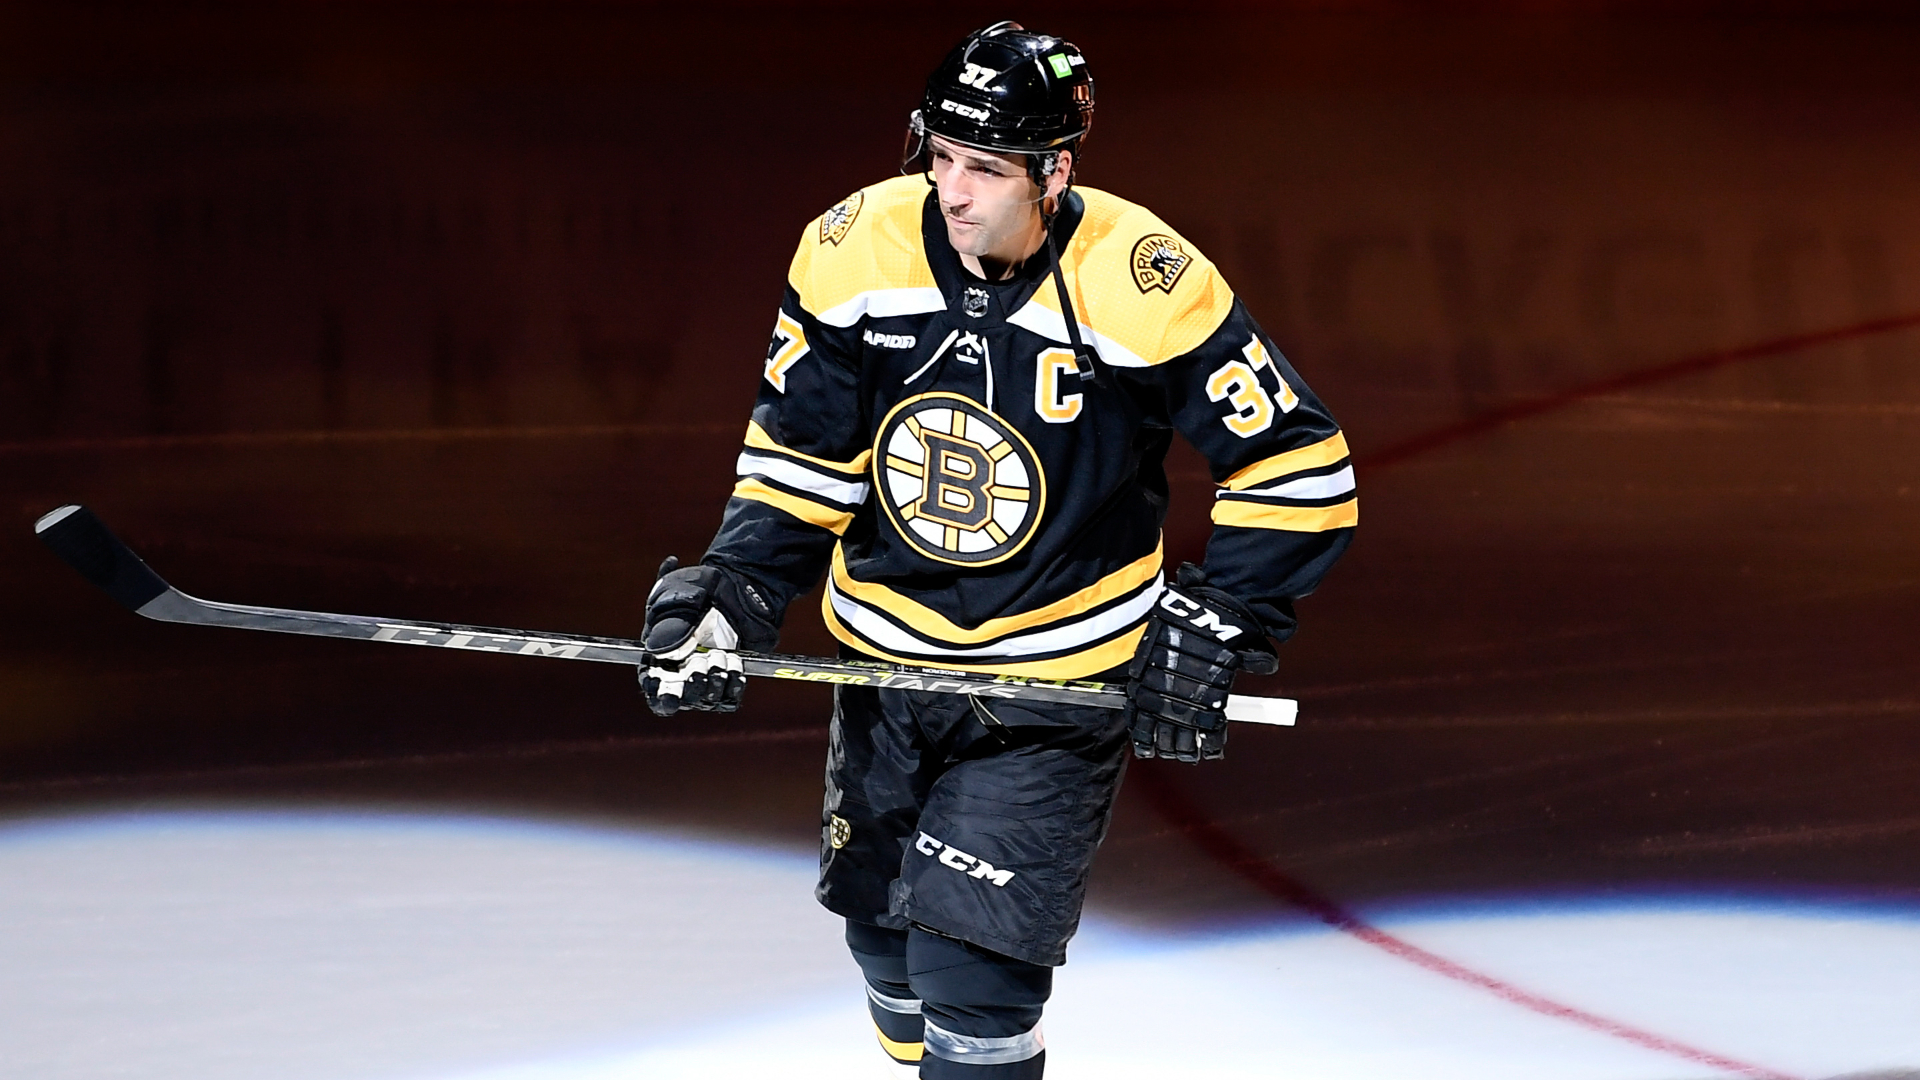 Ray Bourque on hockey sticks, dining out in Boston, and his